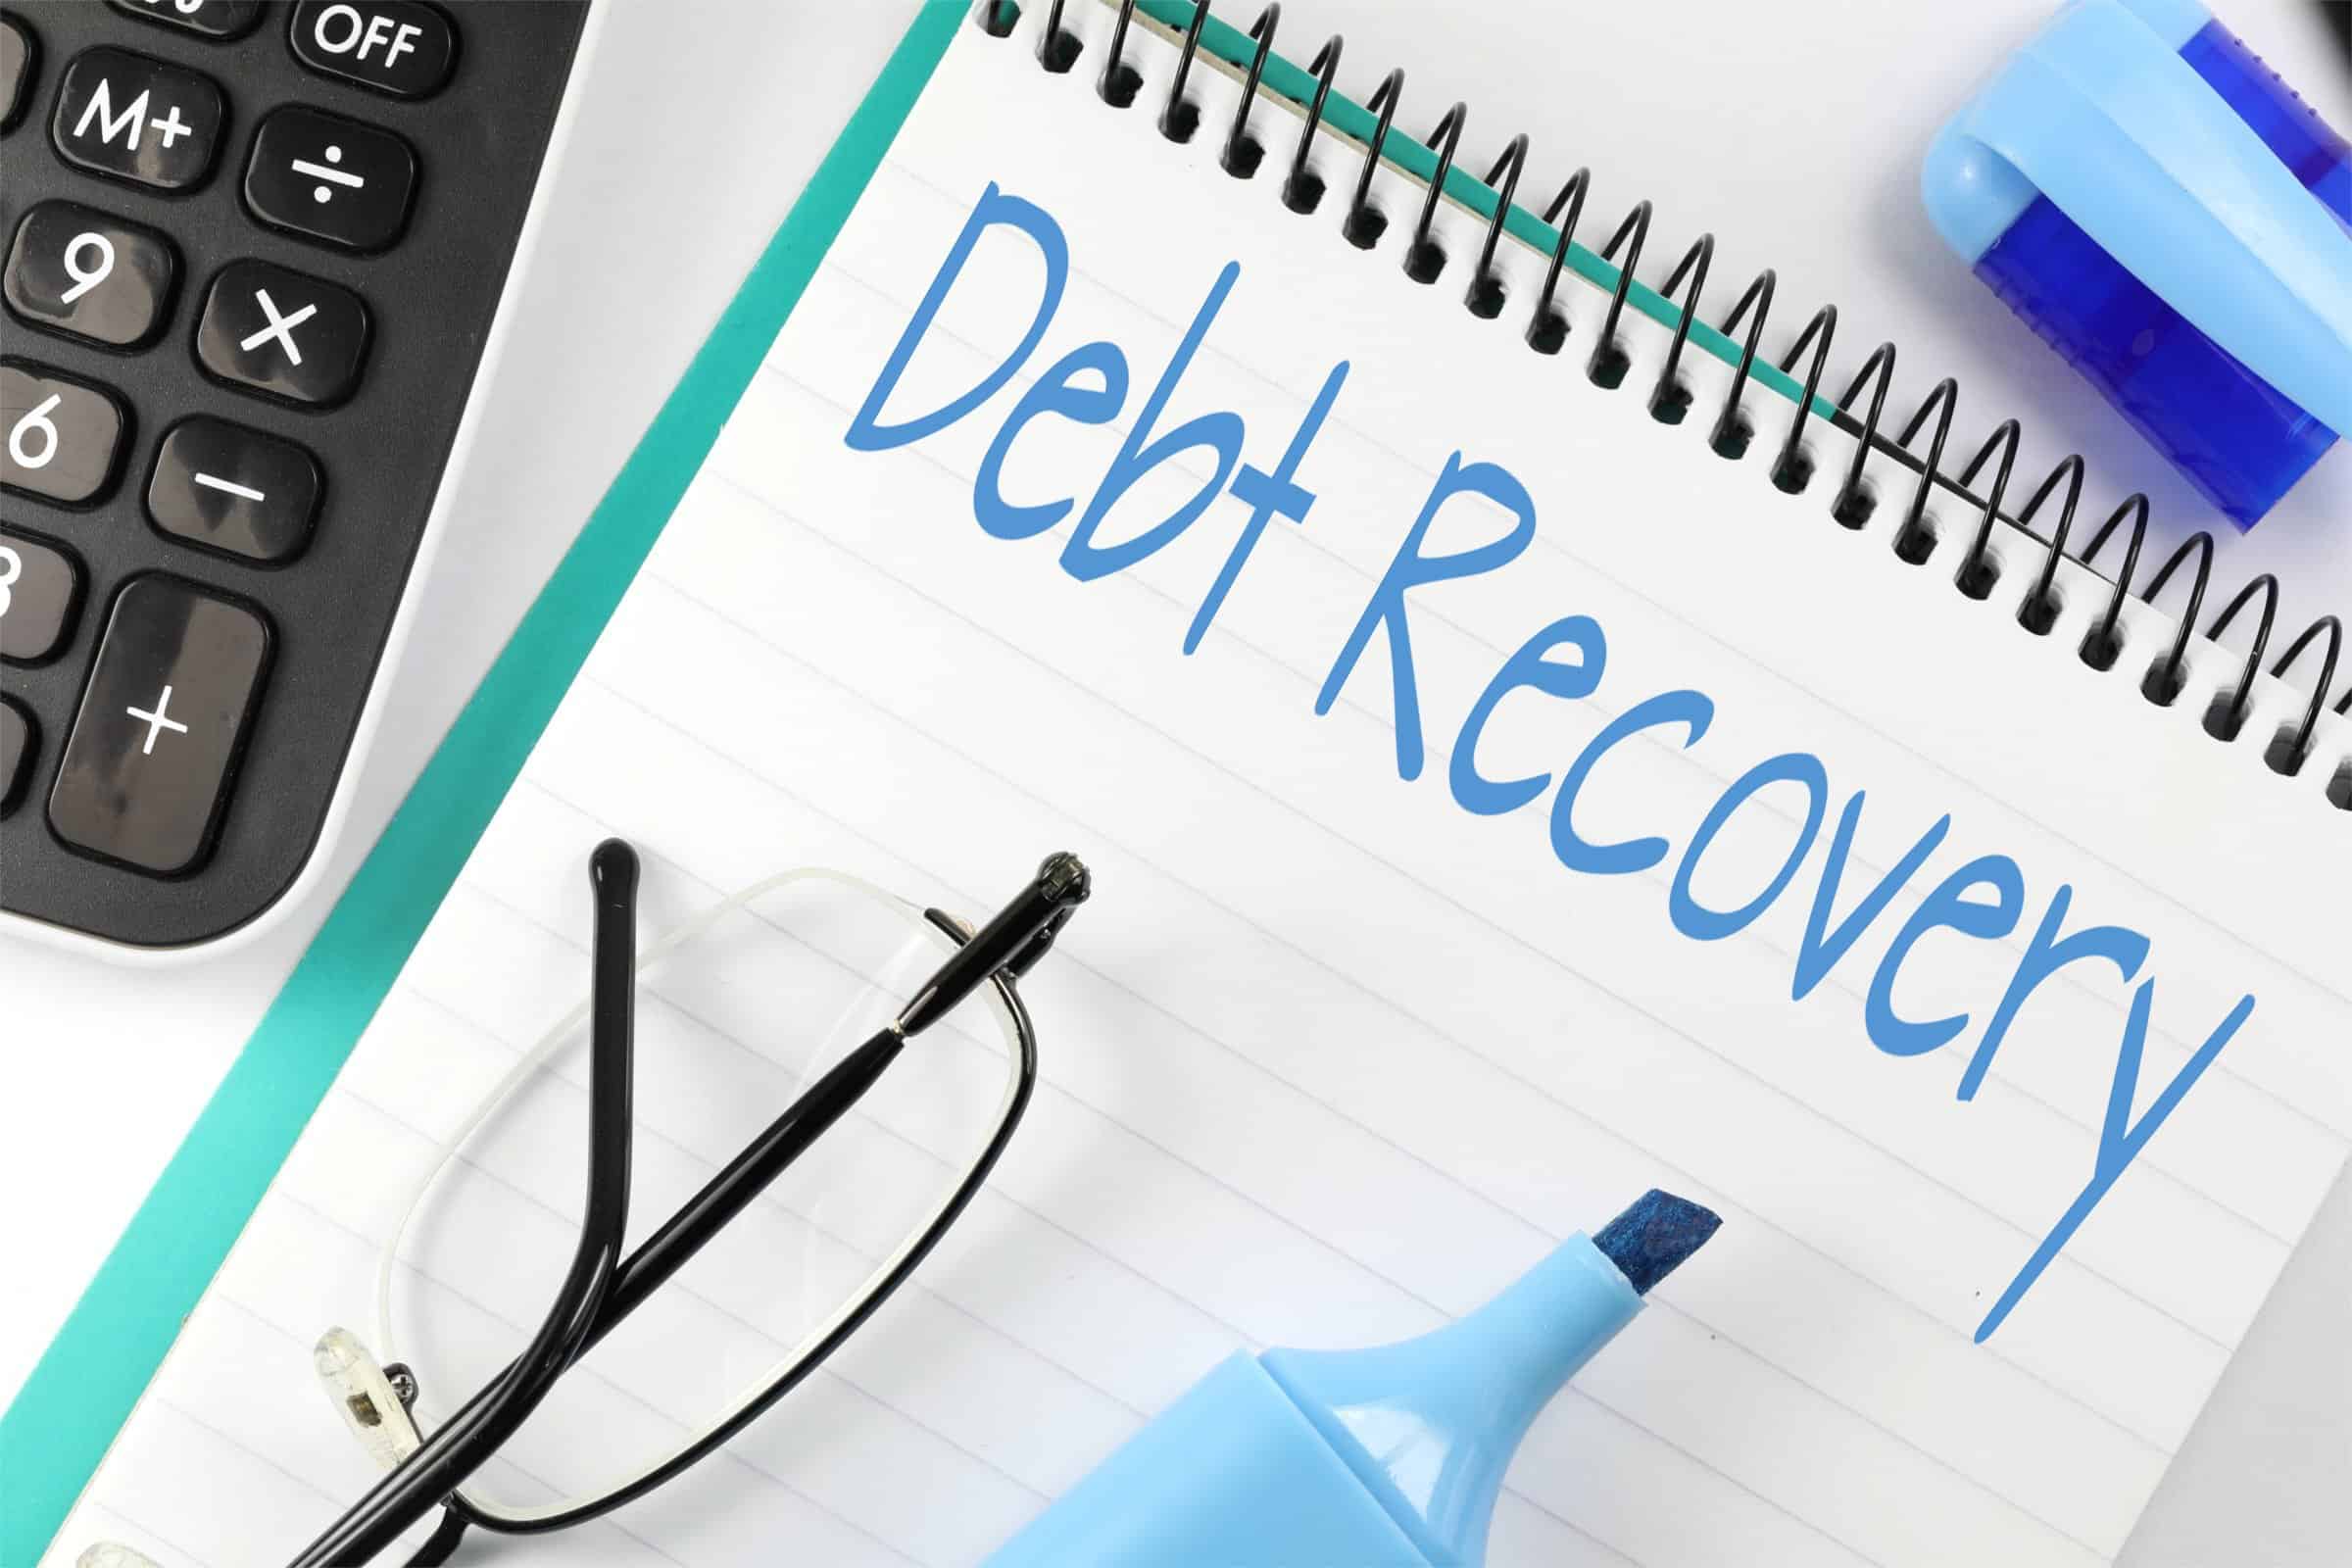 Debt Recovery Agent services in nigeria